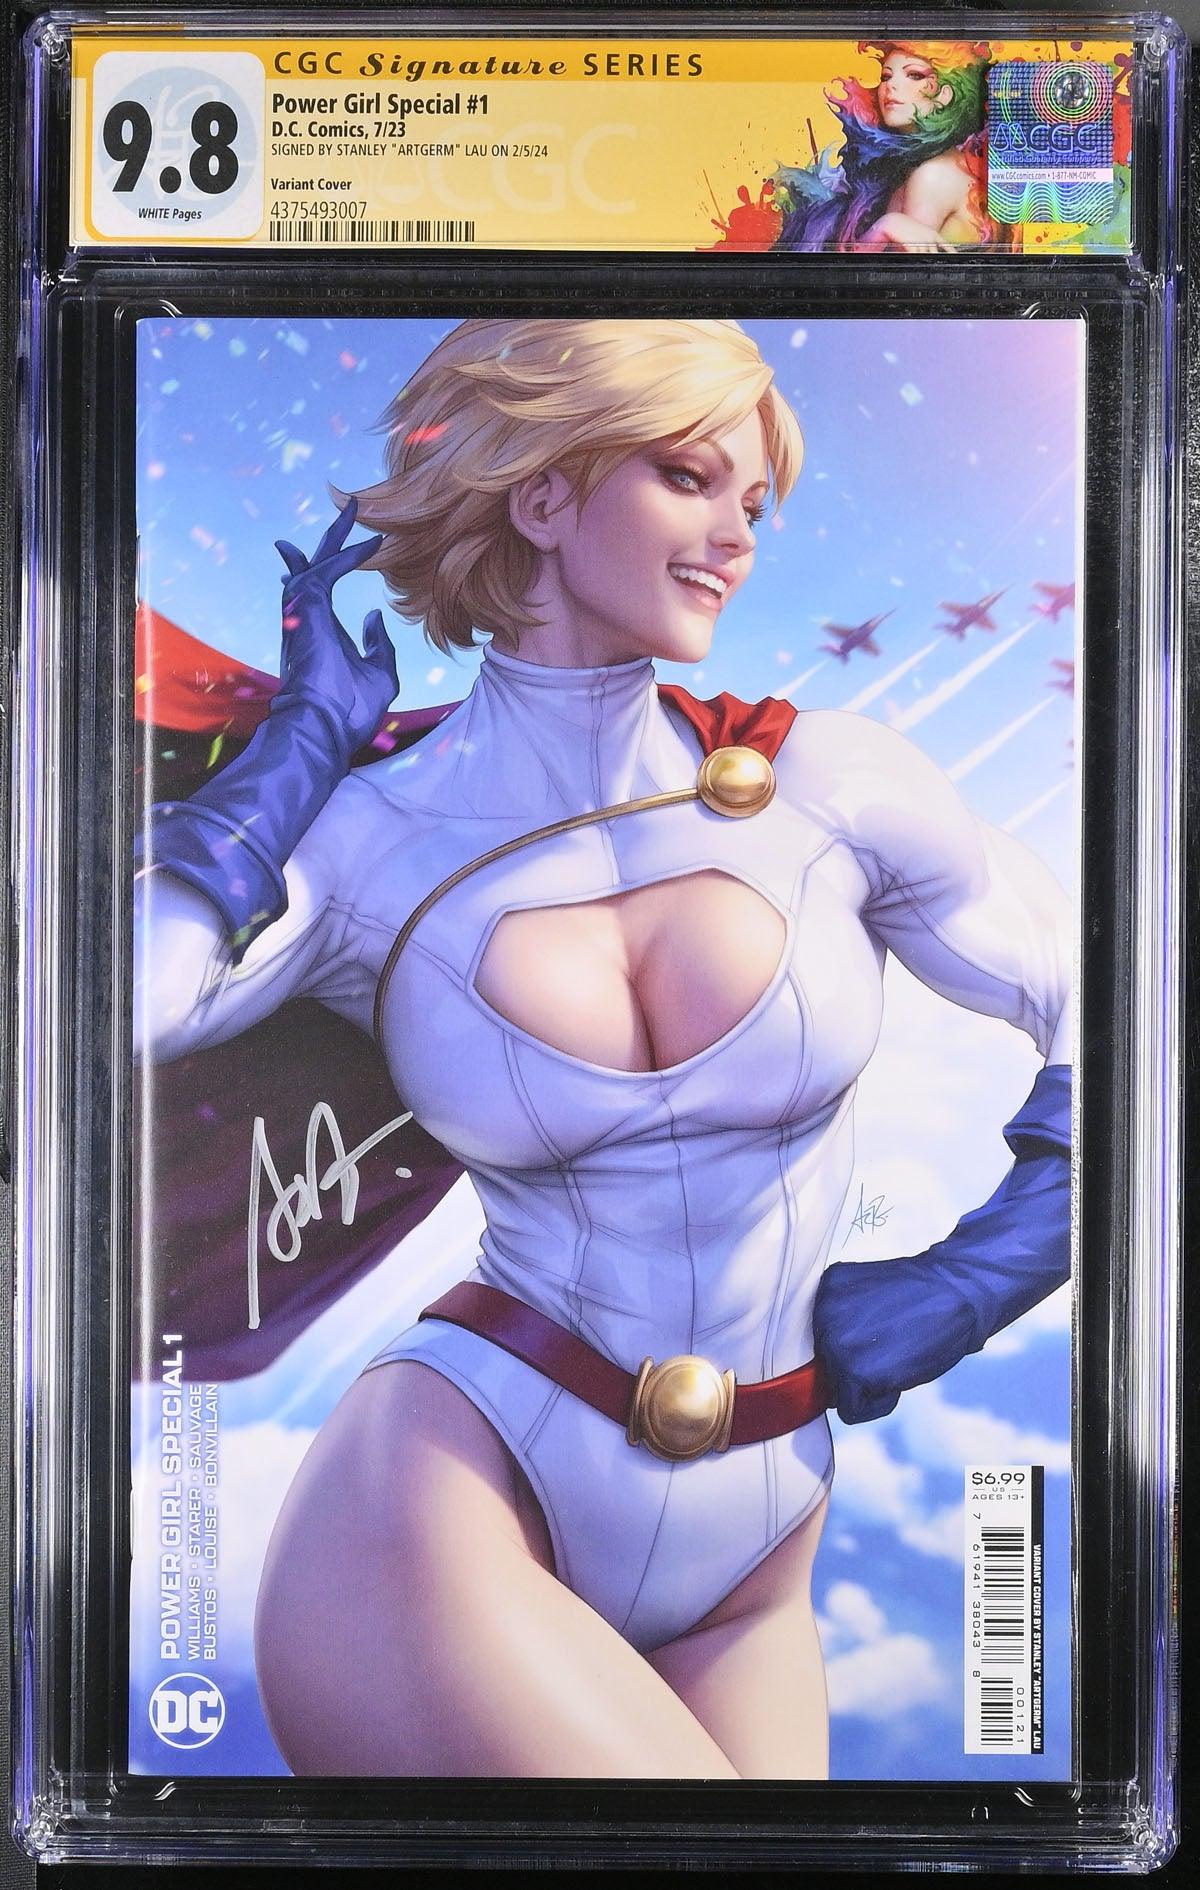 CGC POWER GIRL SPECIAL #1 LAU VARIANT (9.8) SIGNATURE SERIES - SIGNED BY STANLEY "ARTGERM"